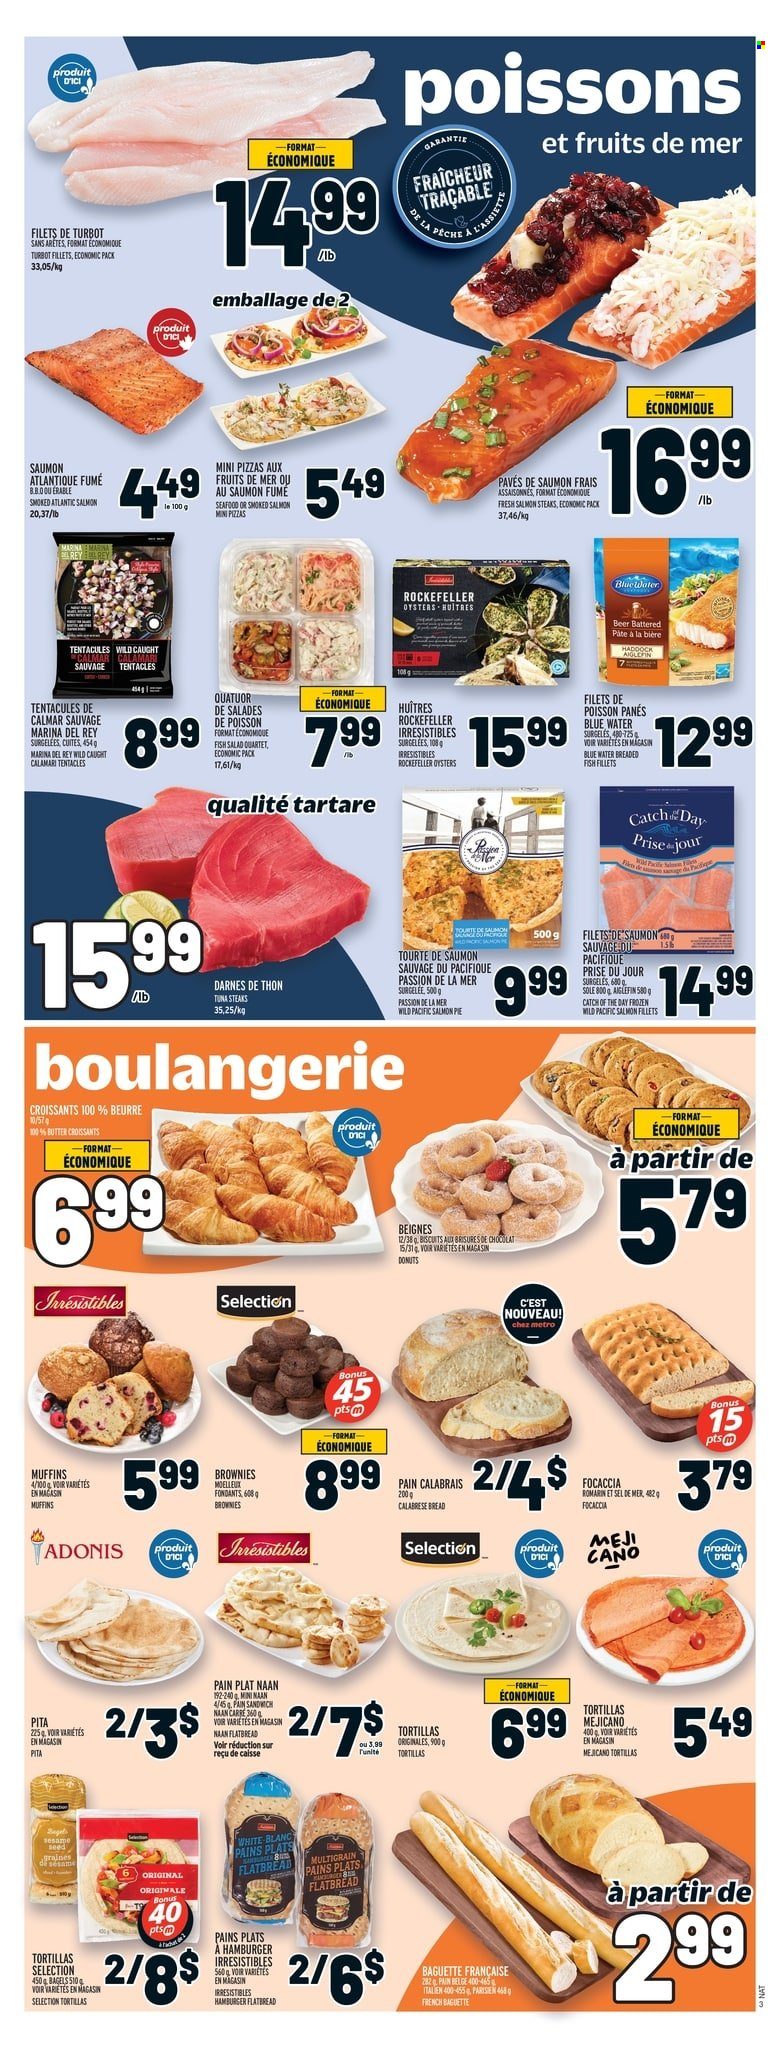 thumbnail - Metro Flyer - March 23, 2023 - March 29, 2023 - Sales products - bagels, bread, tortillas, pita, pie, croissant, focaccia, flatbread, brownies, donut, muffin, salad, calamari, fish fillets, salmon fillet, smoked salmon, tuna, oysters, turbot, seafood, fish, pizza, hamburger, breaded fish, biscuit, sesame seed, water, beer, steak, baguette. Page 4.